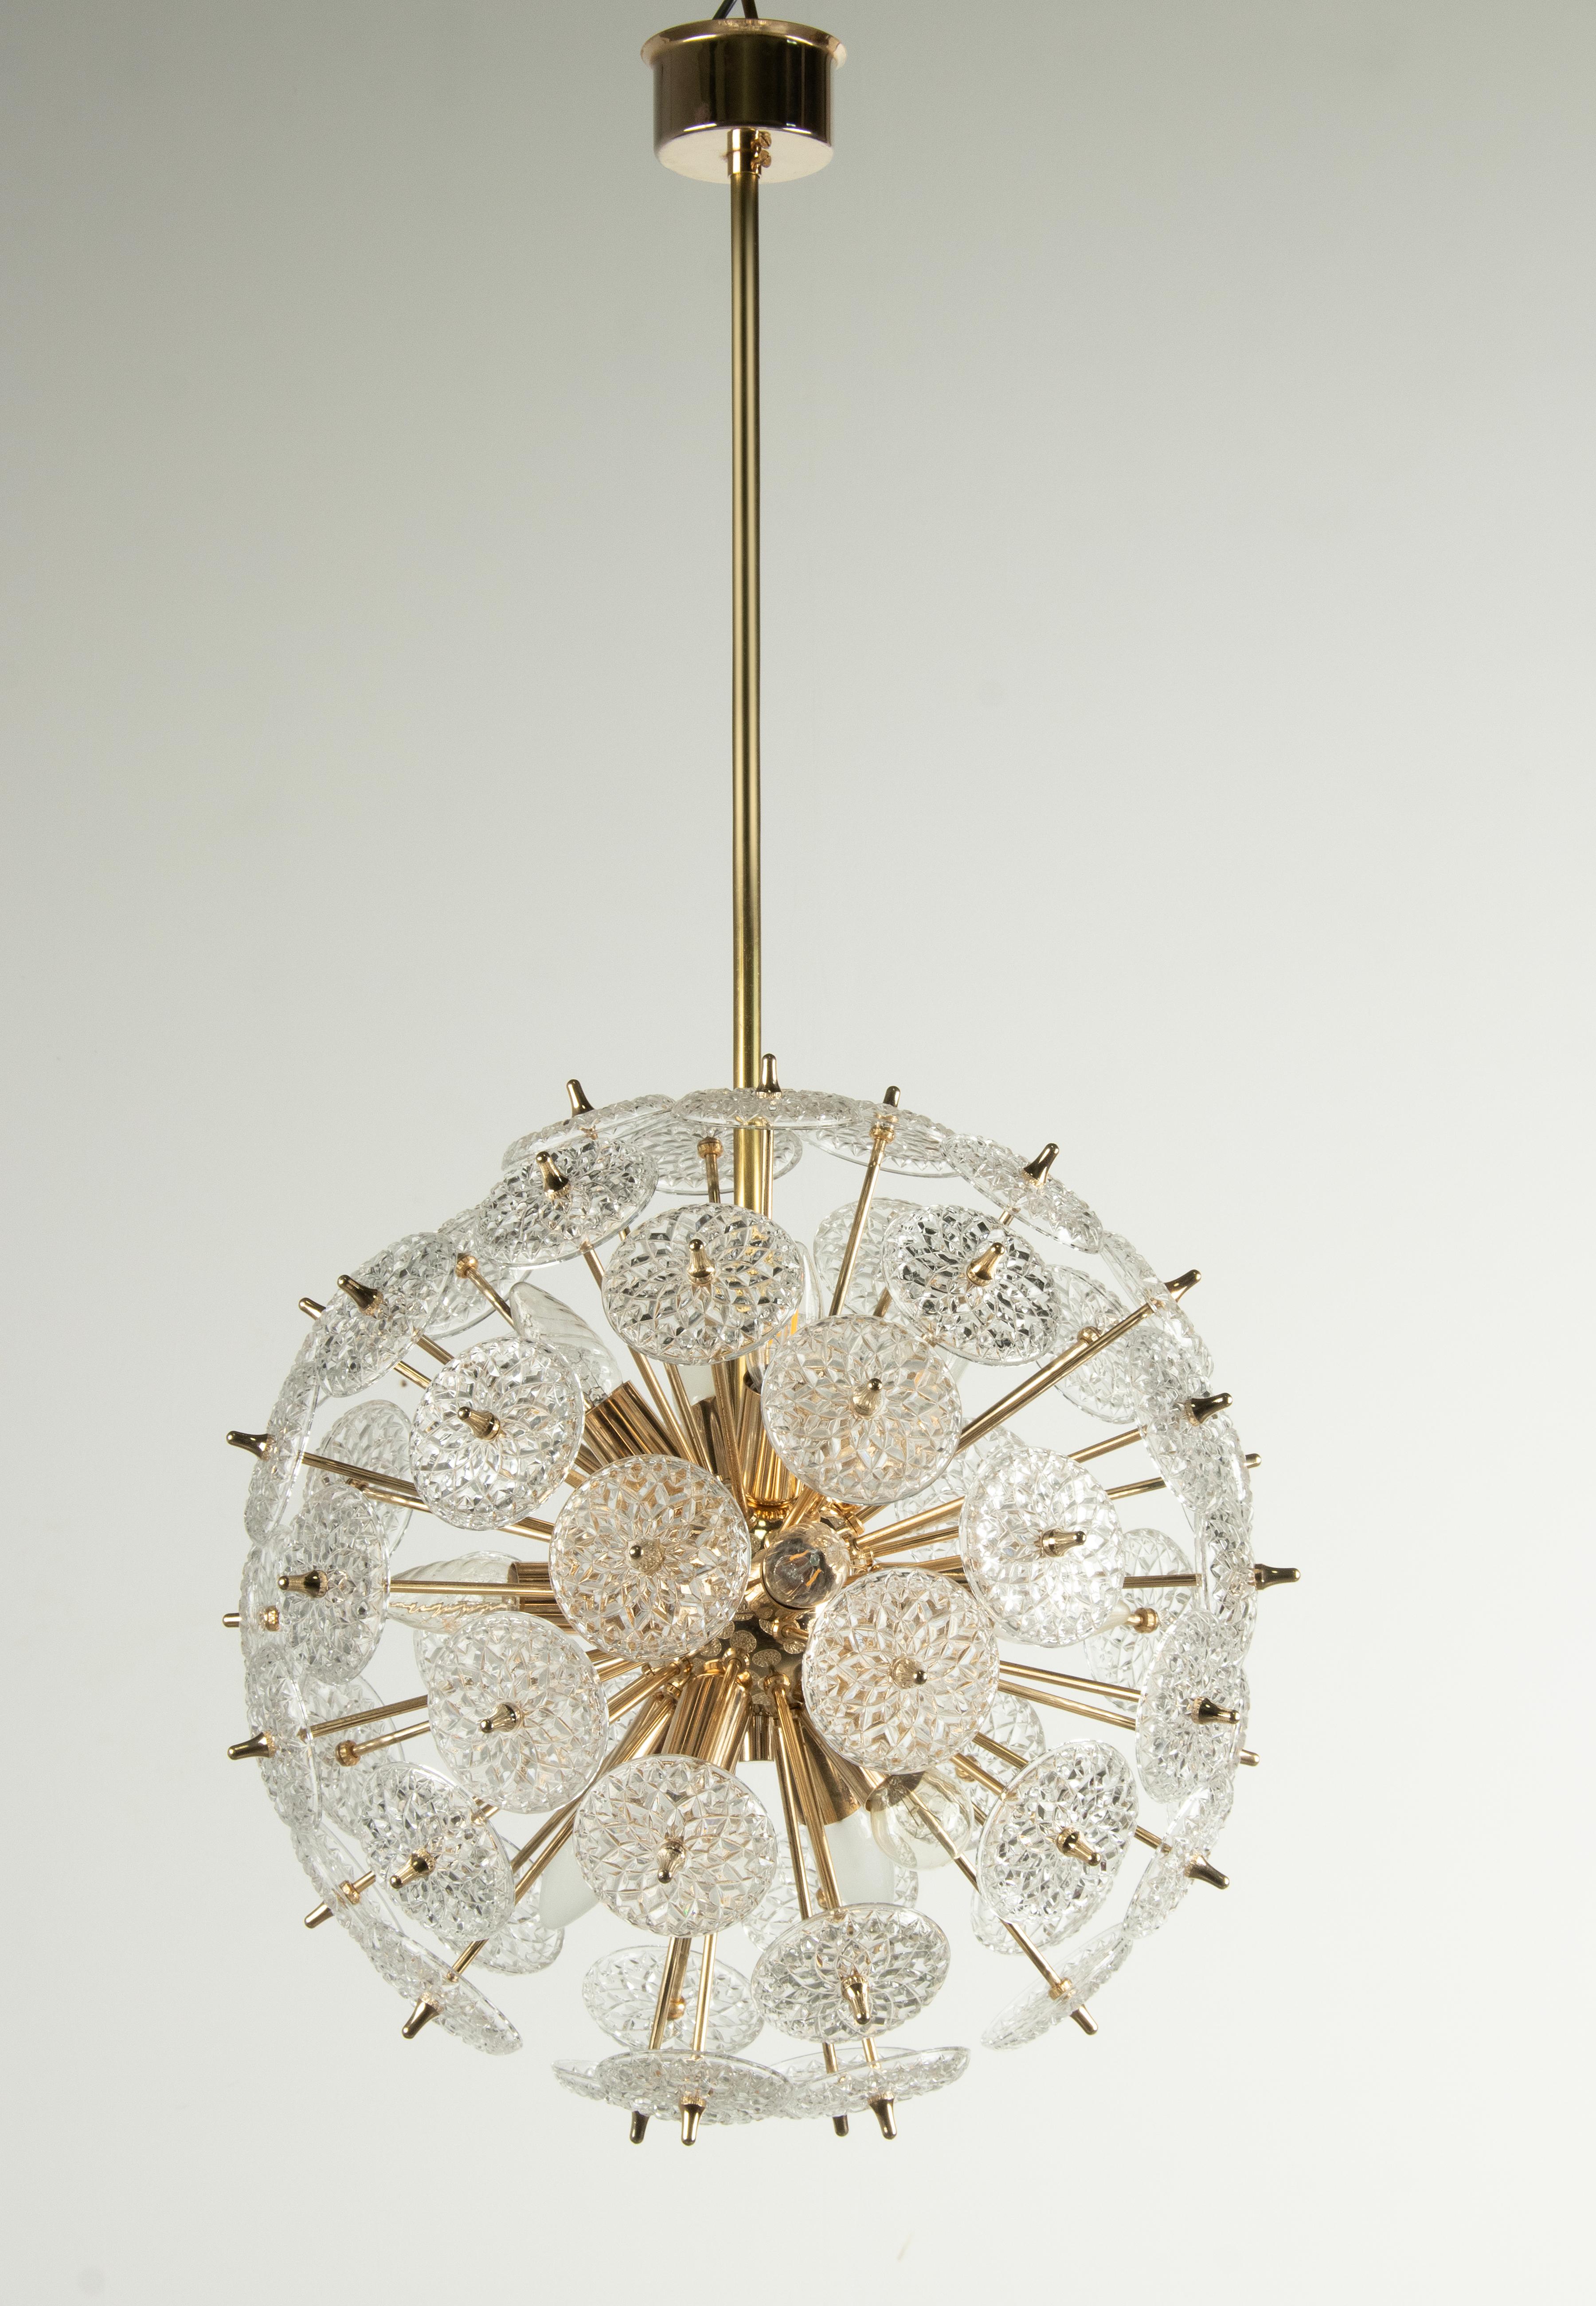 Beautiful ceiling lamp, a Sputnik model with many glass disks. The disks are cut and therefore you see a nice reflection of the light shining through this lamp. The interior is made of polished brass colored metal with twelve E14 lamp sockets. This